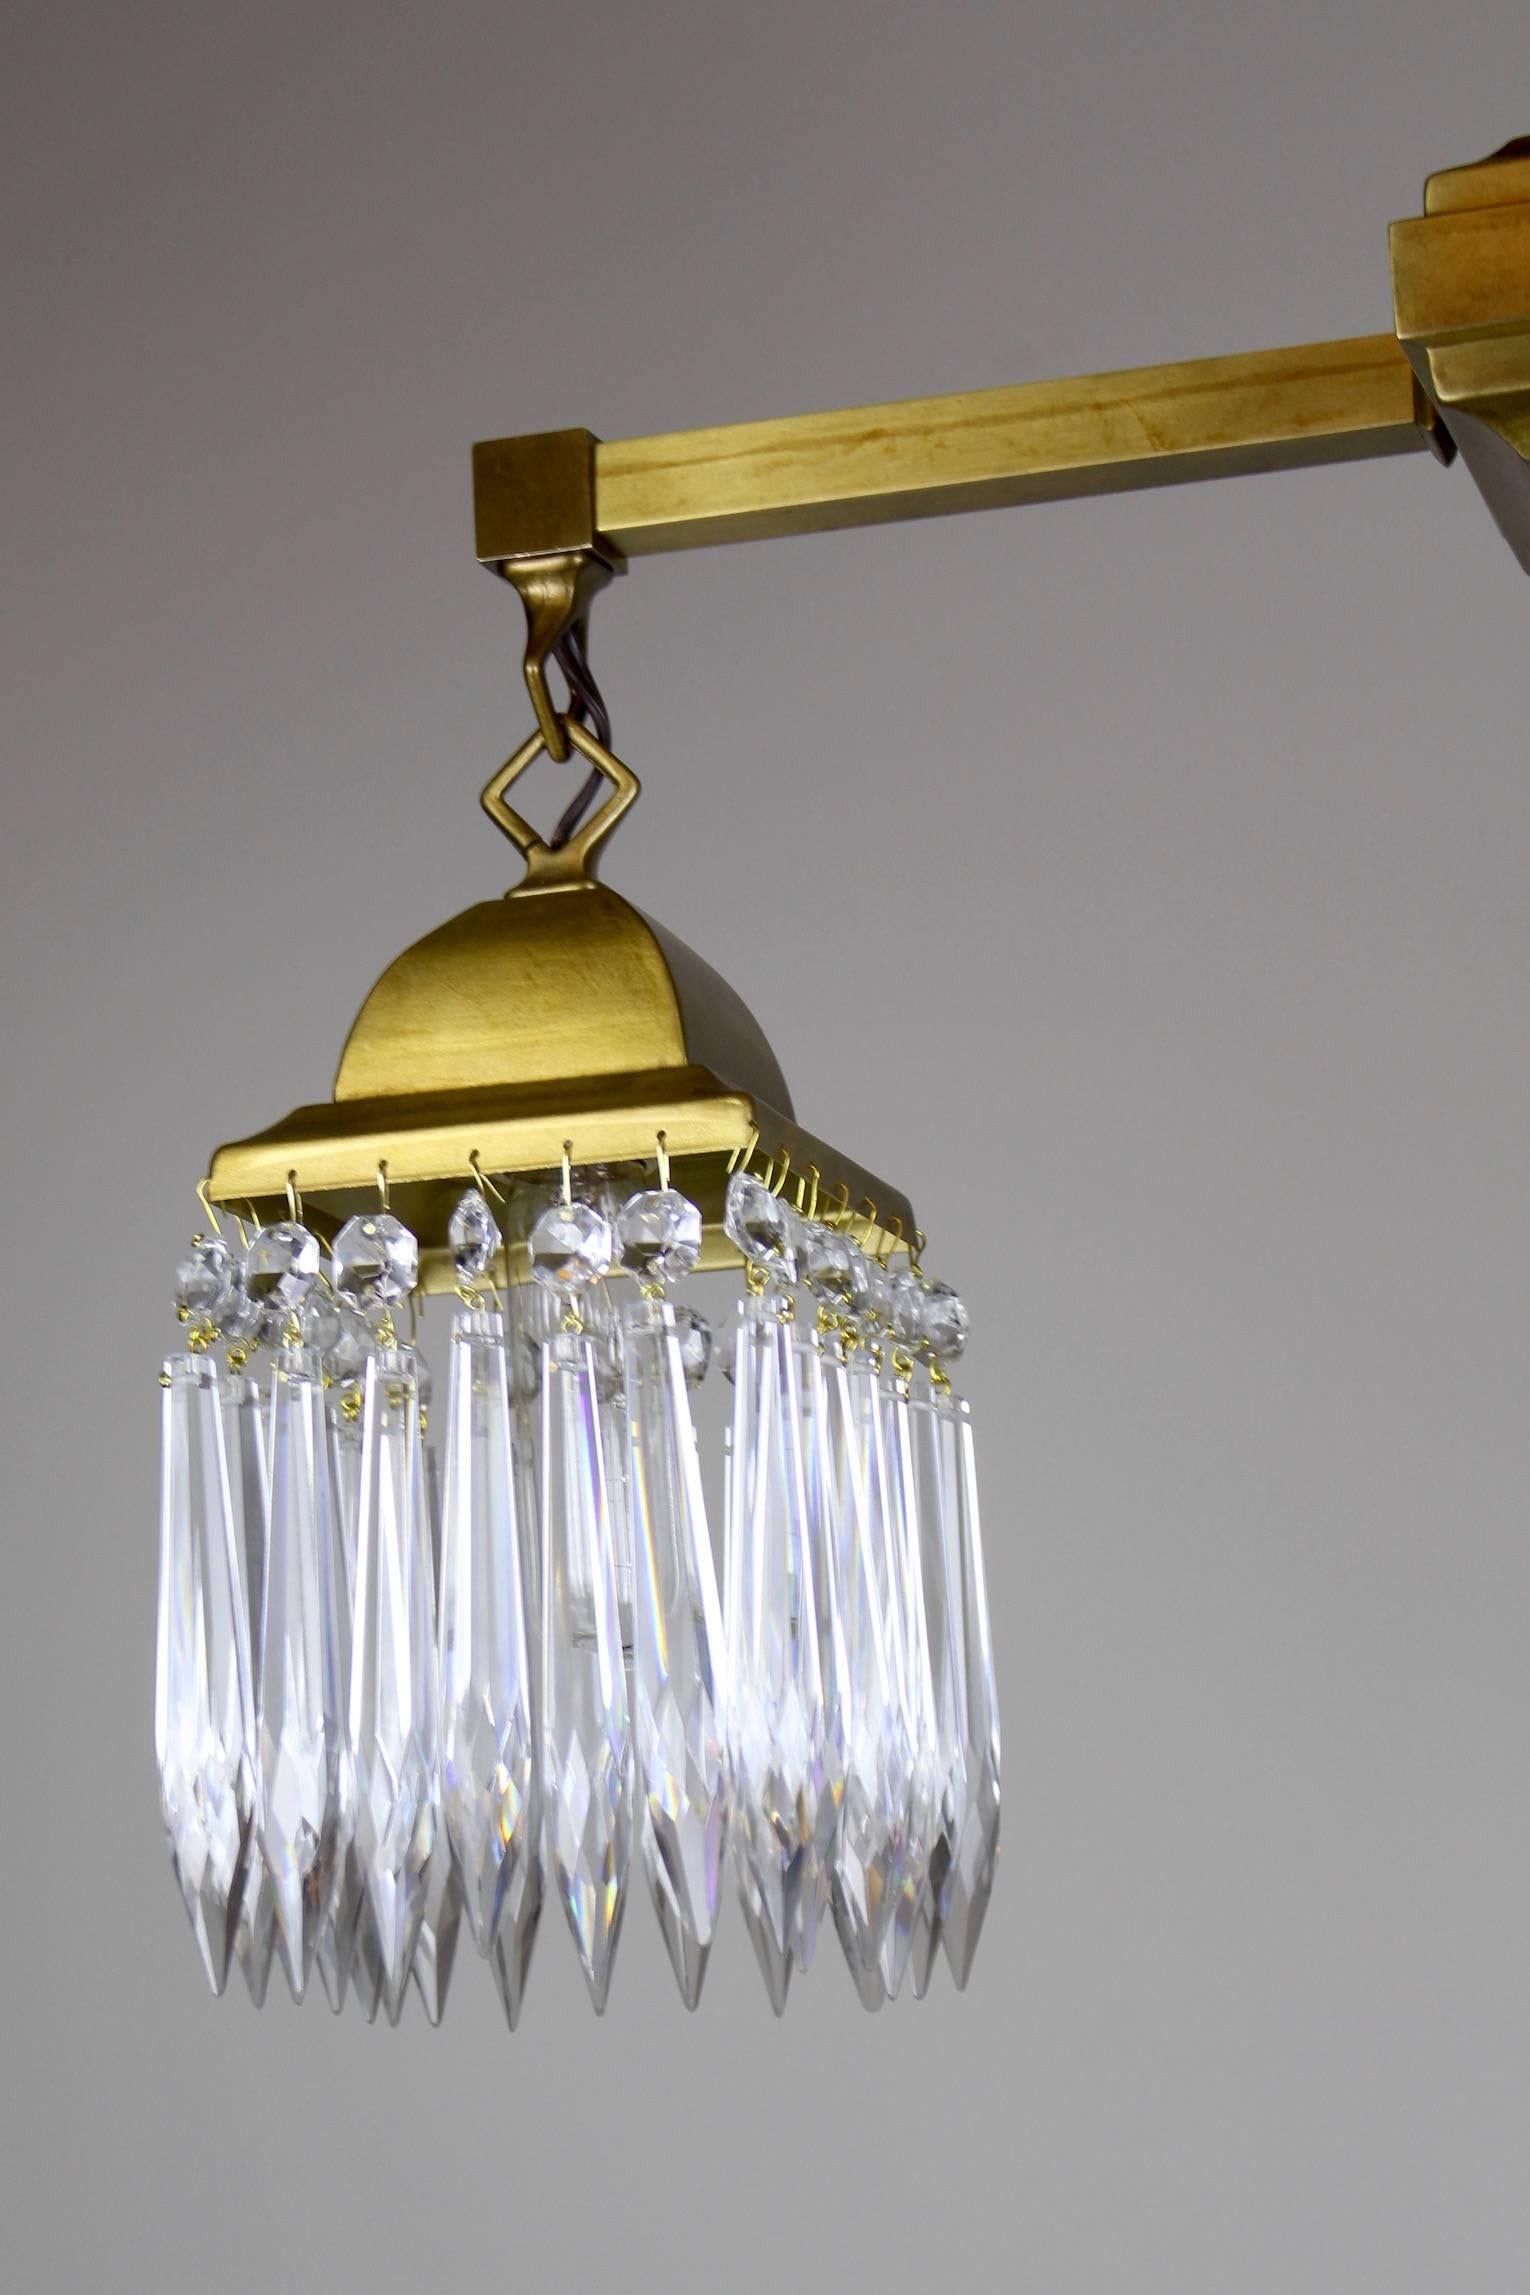 Mission Crystal Fixture circa 1910 Satin Brass Two-Light In Excellent Condition For Sale In Vancouver, BC